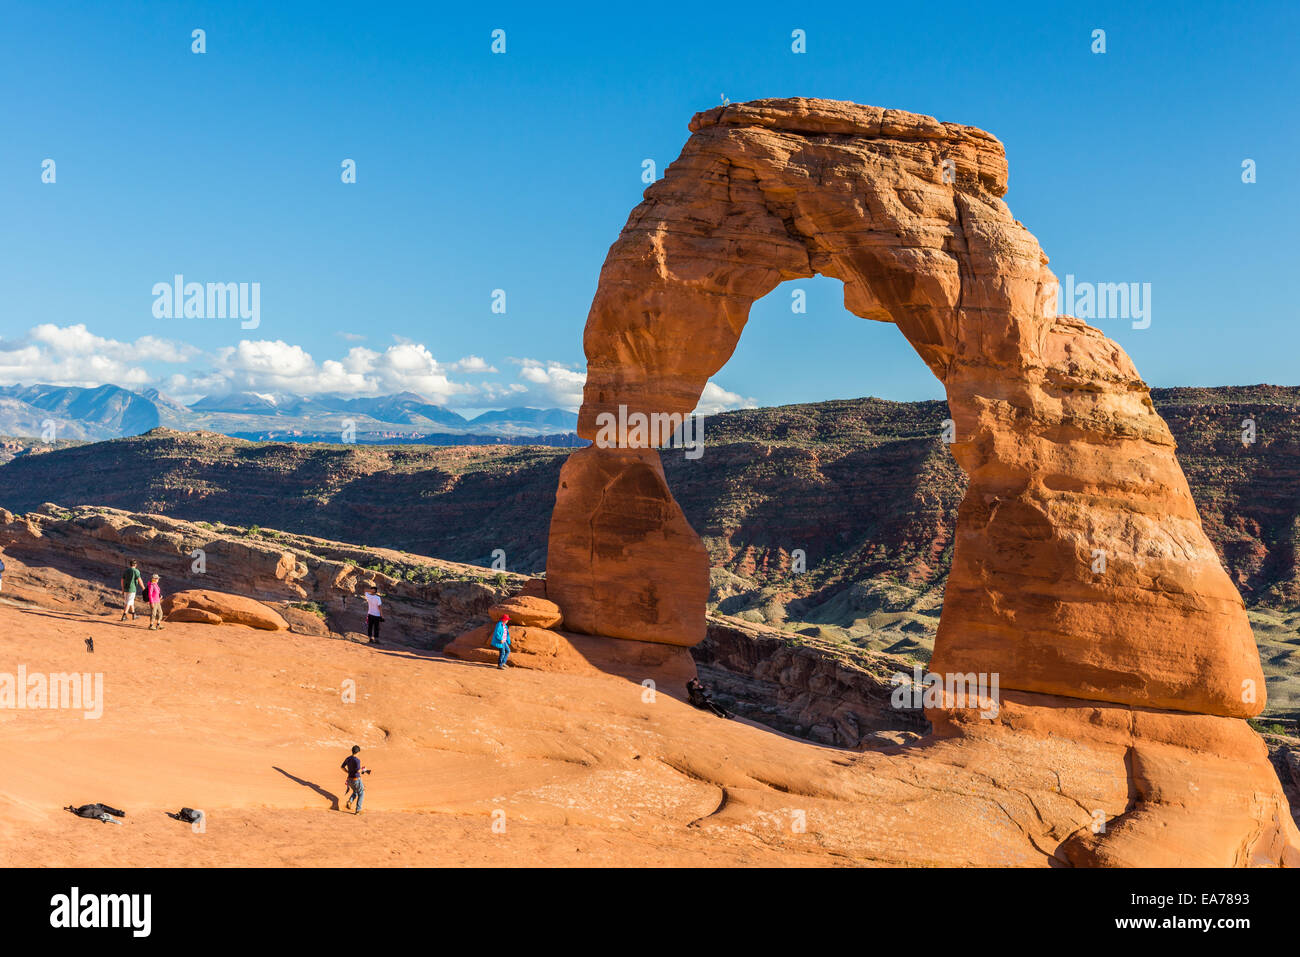 The Delicate Arch, a signature attraction of the Arches National Park, Utah, USA. Stock Photo